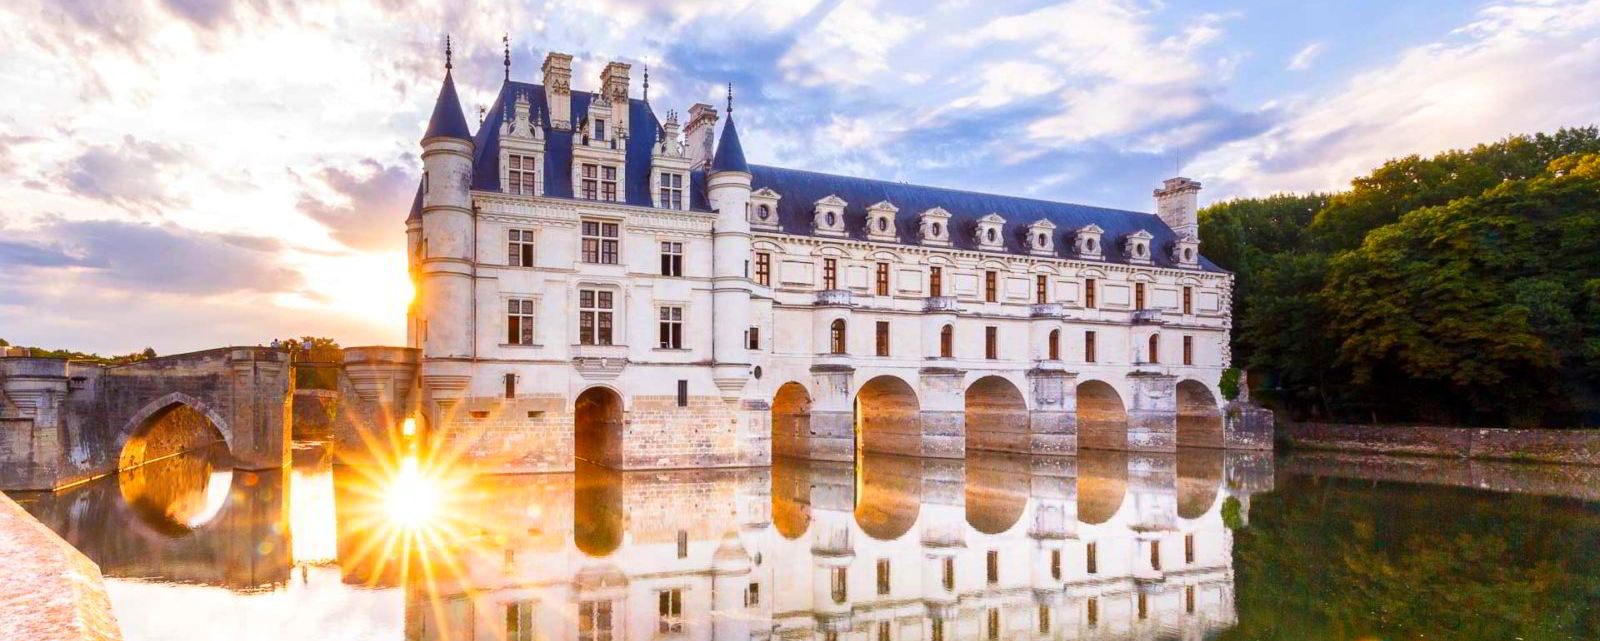 France Loire Valley Chenonceau Castle picture, private guided visit, Luxury Holidays with In-Luxe Travel France, The specialist of luxury bespoke holidays in France since 2007